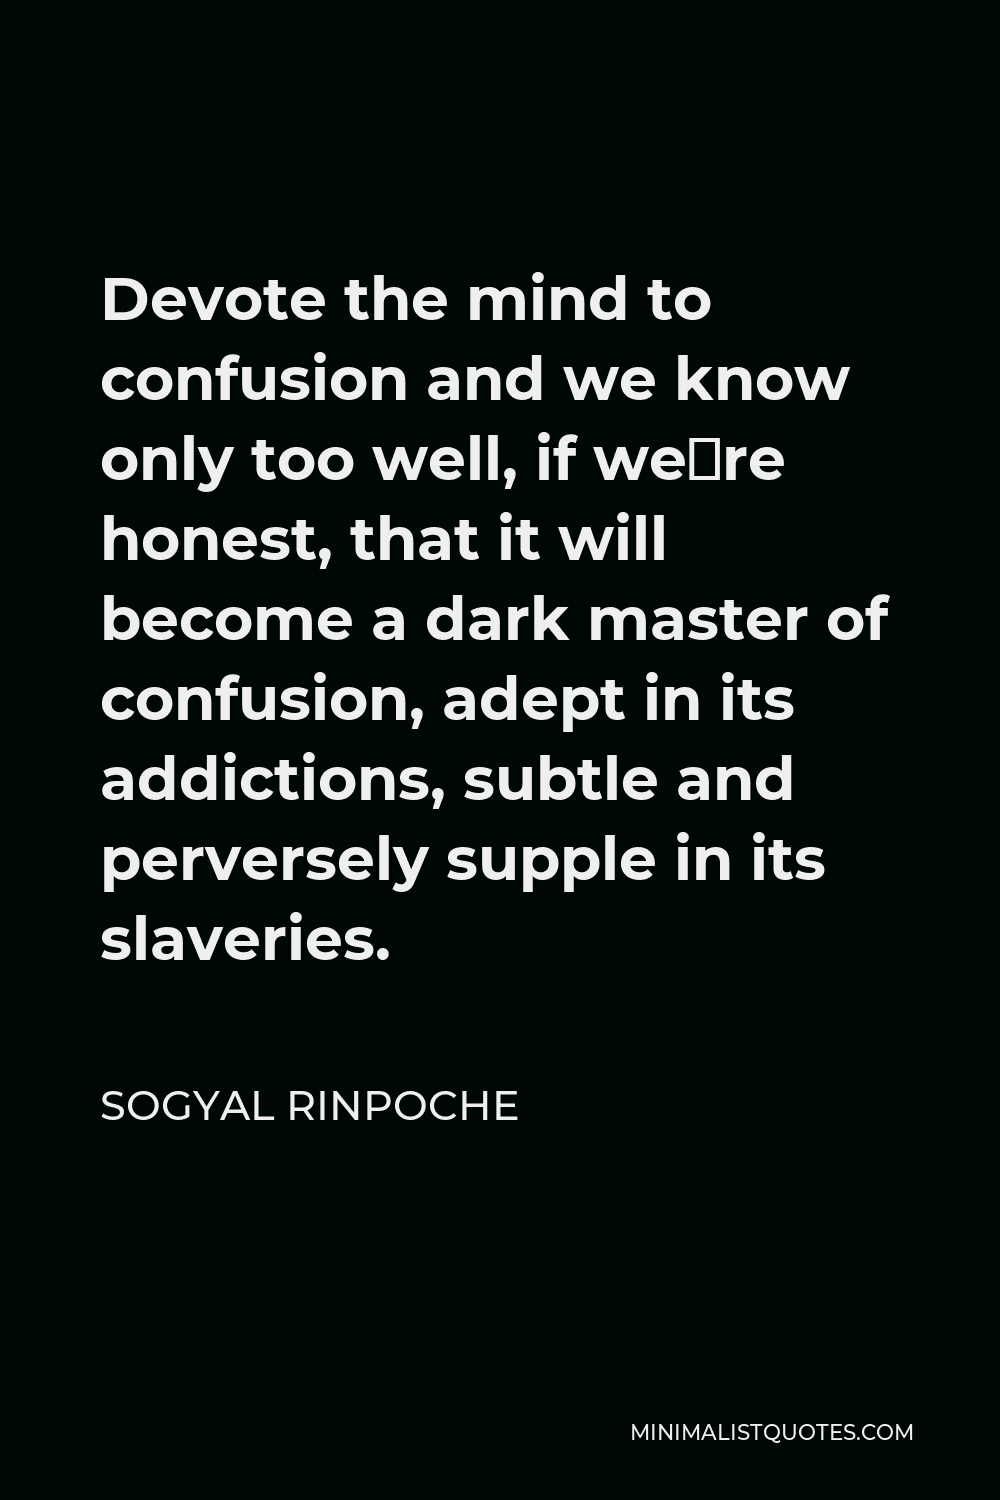 Sogyal Rinpoche Quote - Devote the mind to confusion and we know only too well, if we´re honest, that it will become a dark master of confusion, adept in its addictions, subtle and perversely supple in its slaveries.